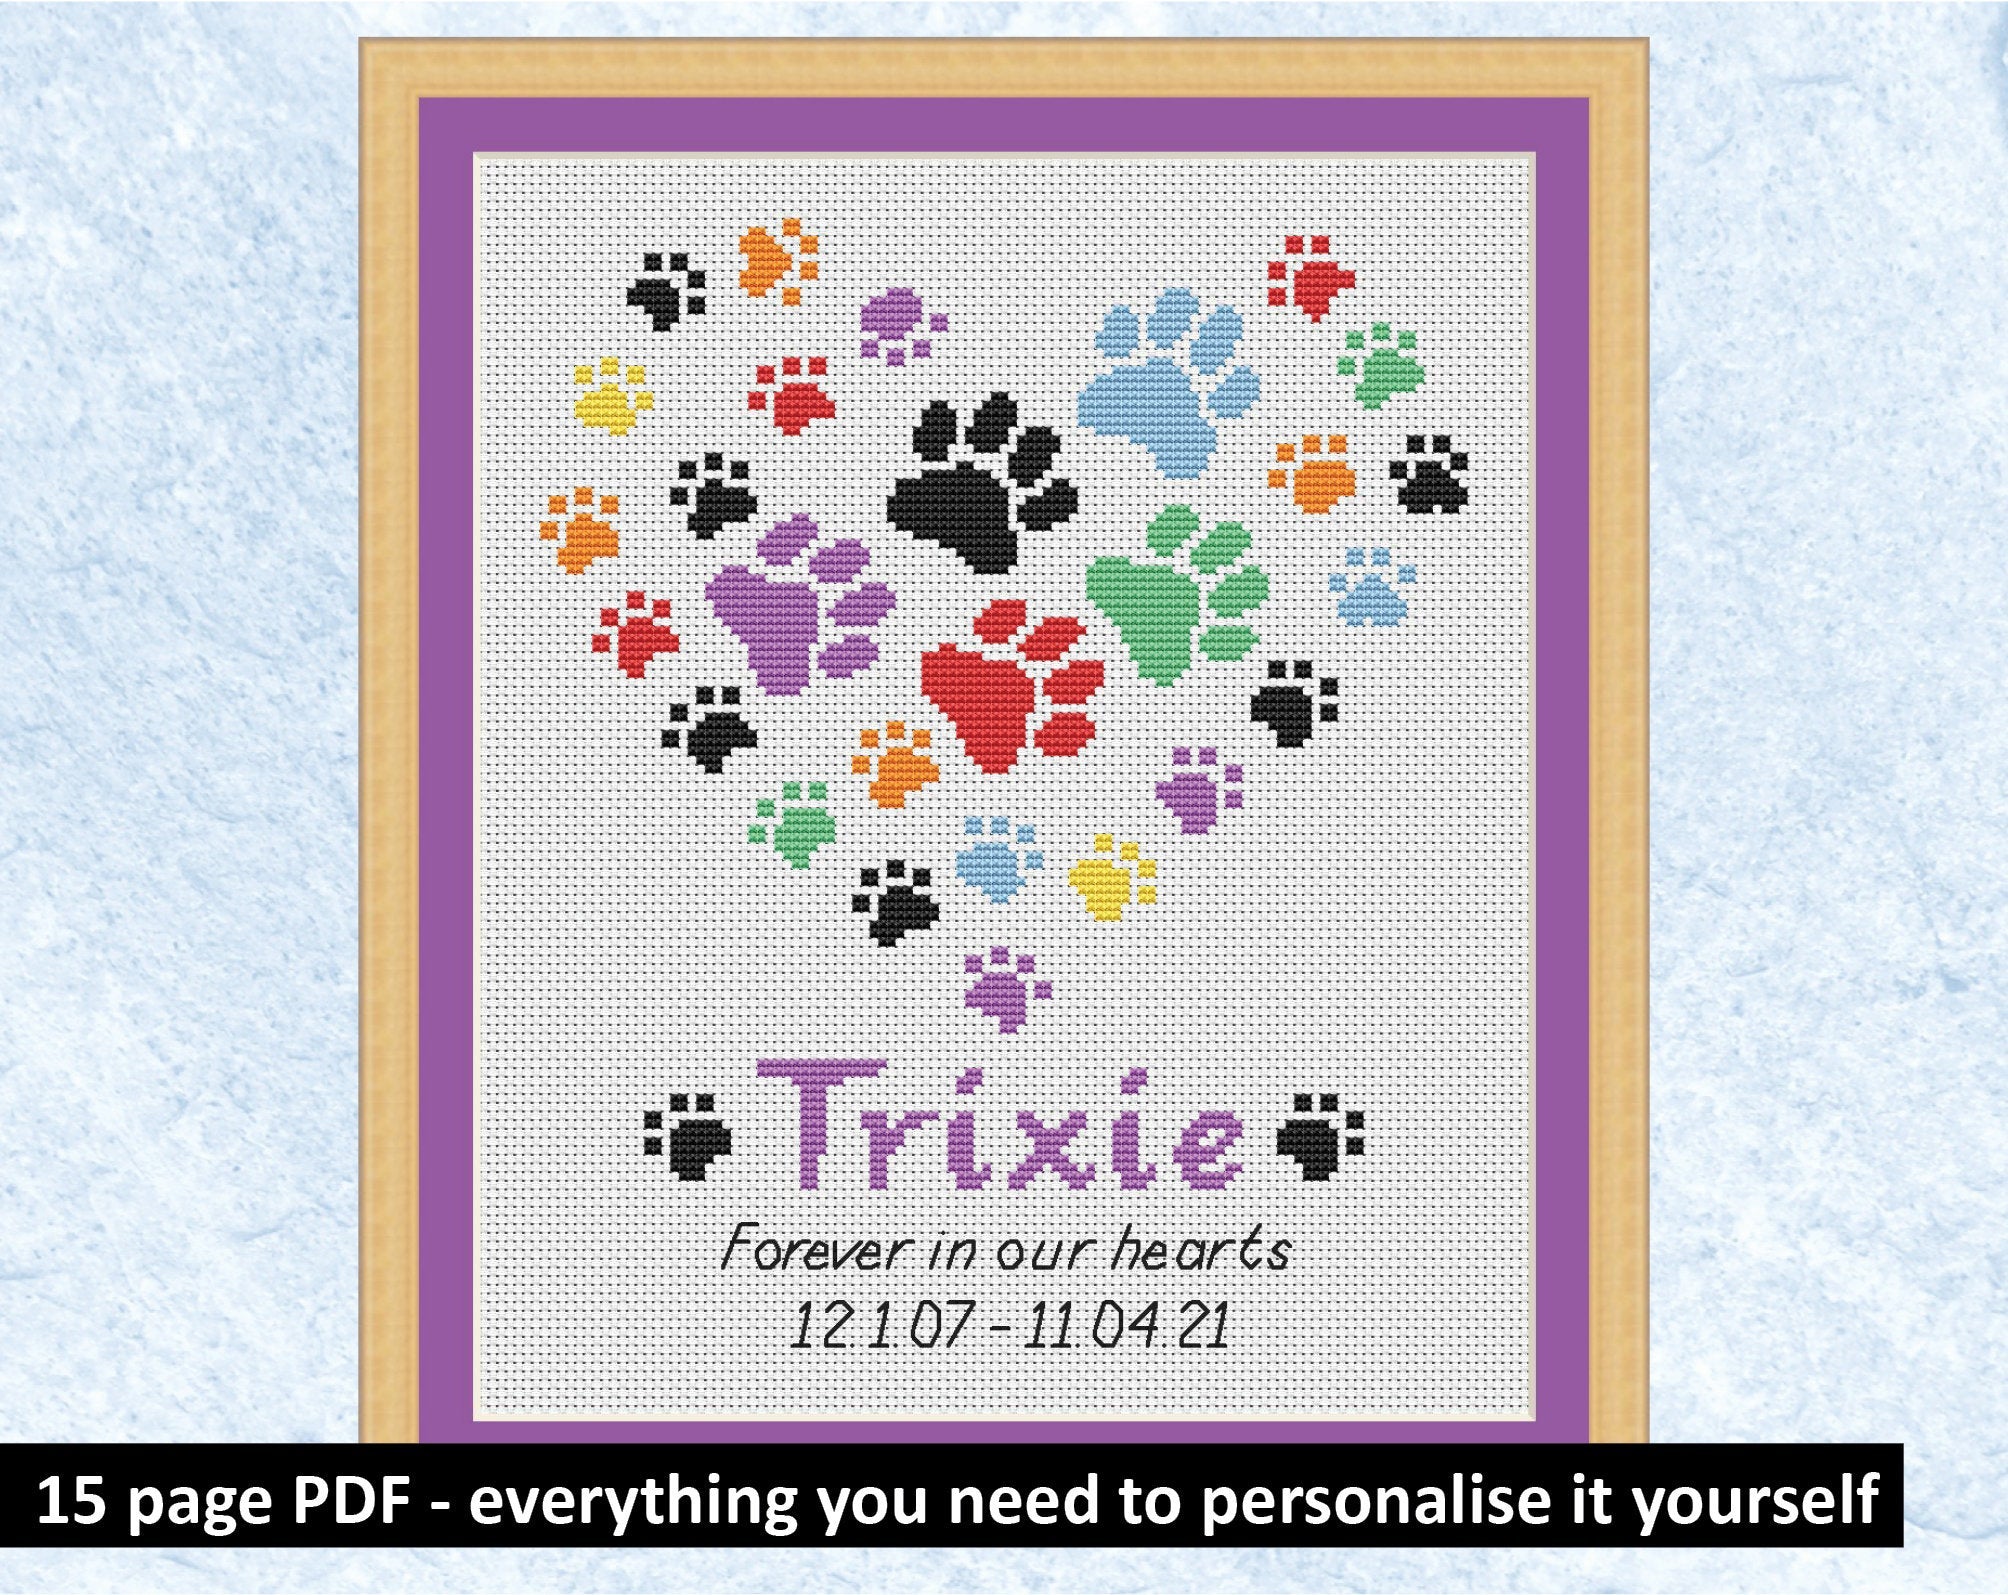 Personalised paw print heart cross stitch pattern - everything included to personalise design yourself